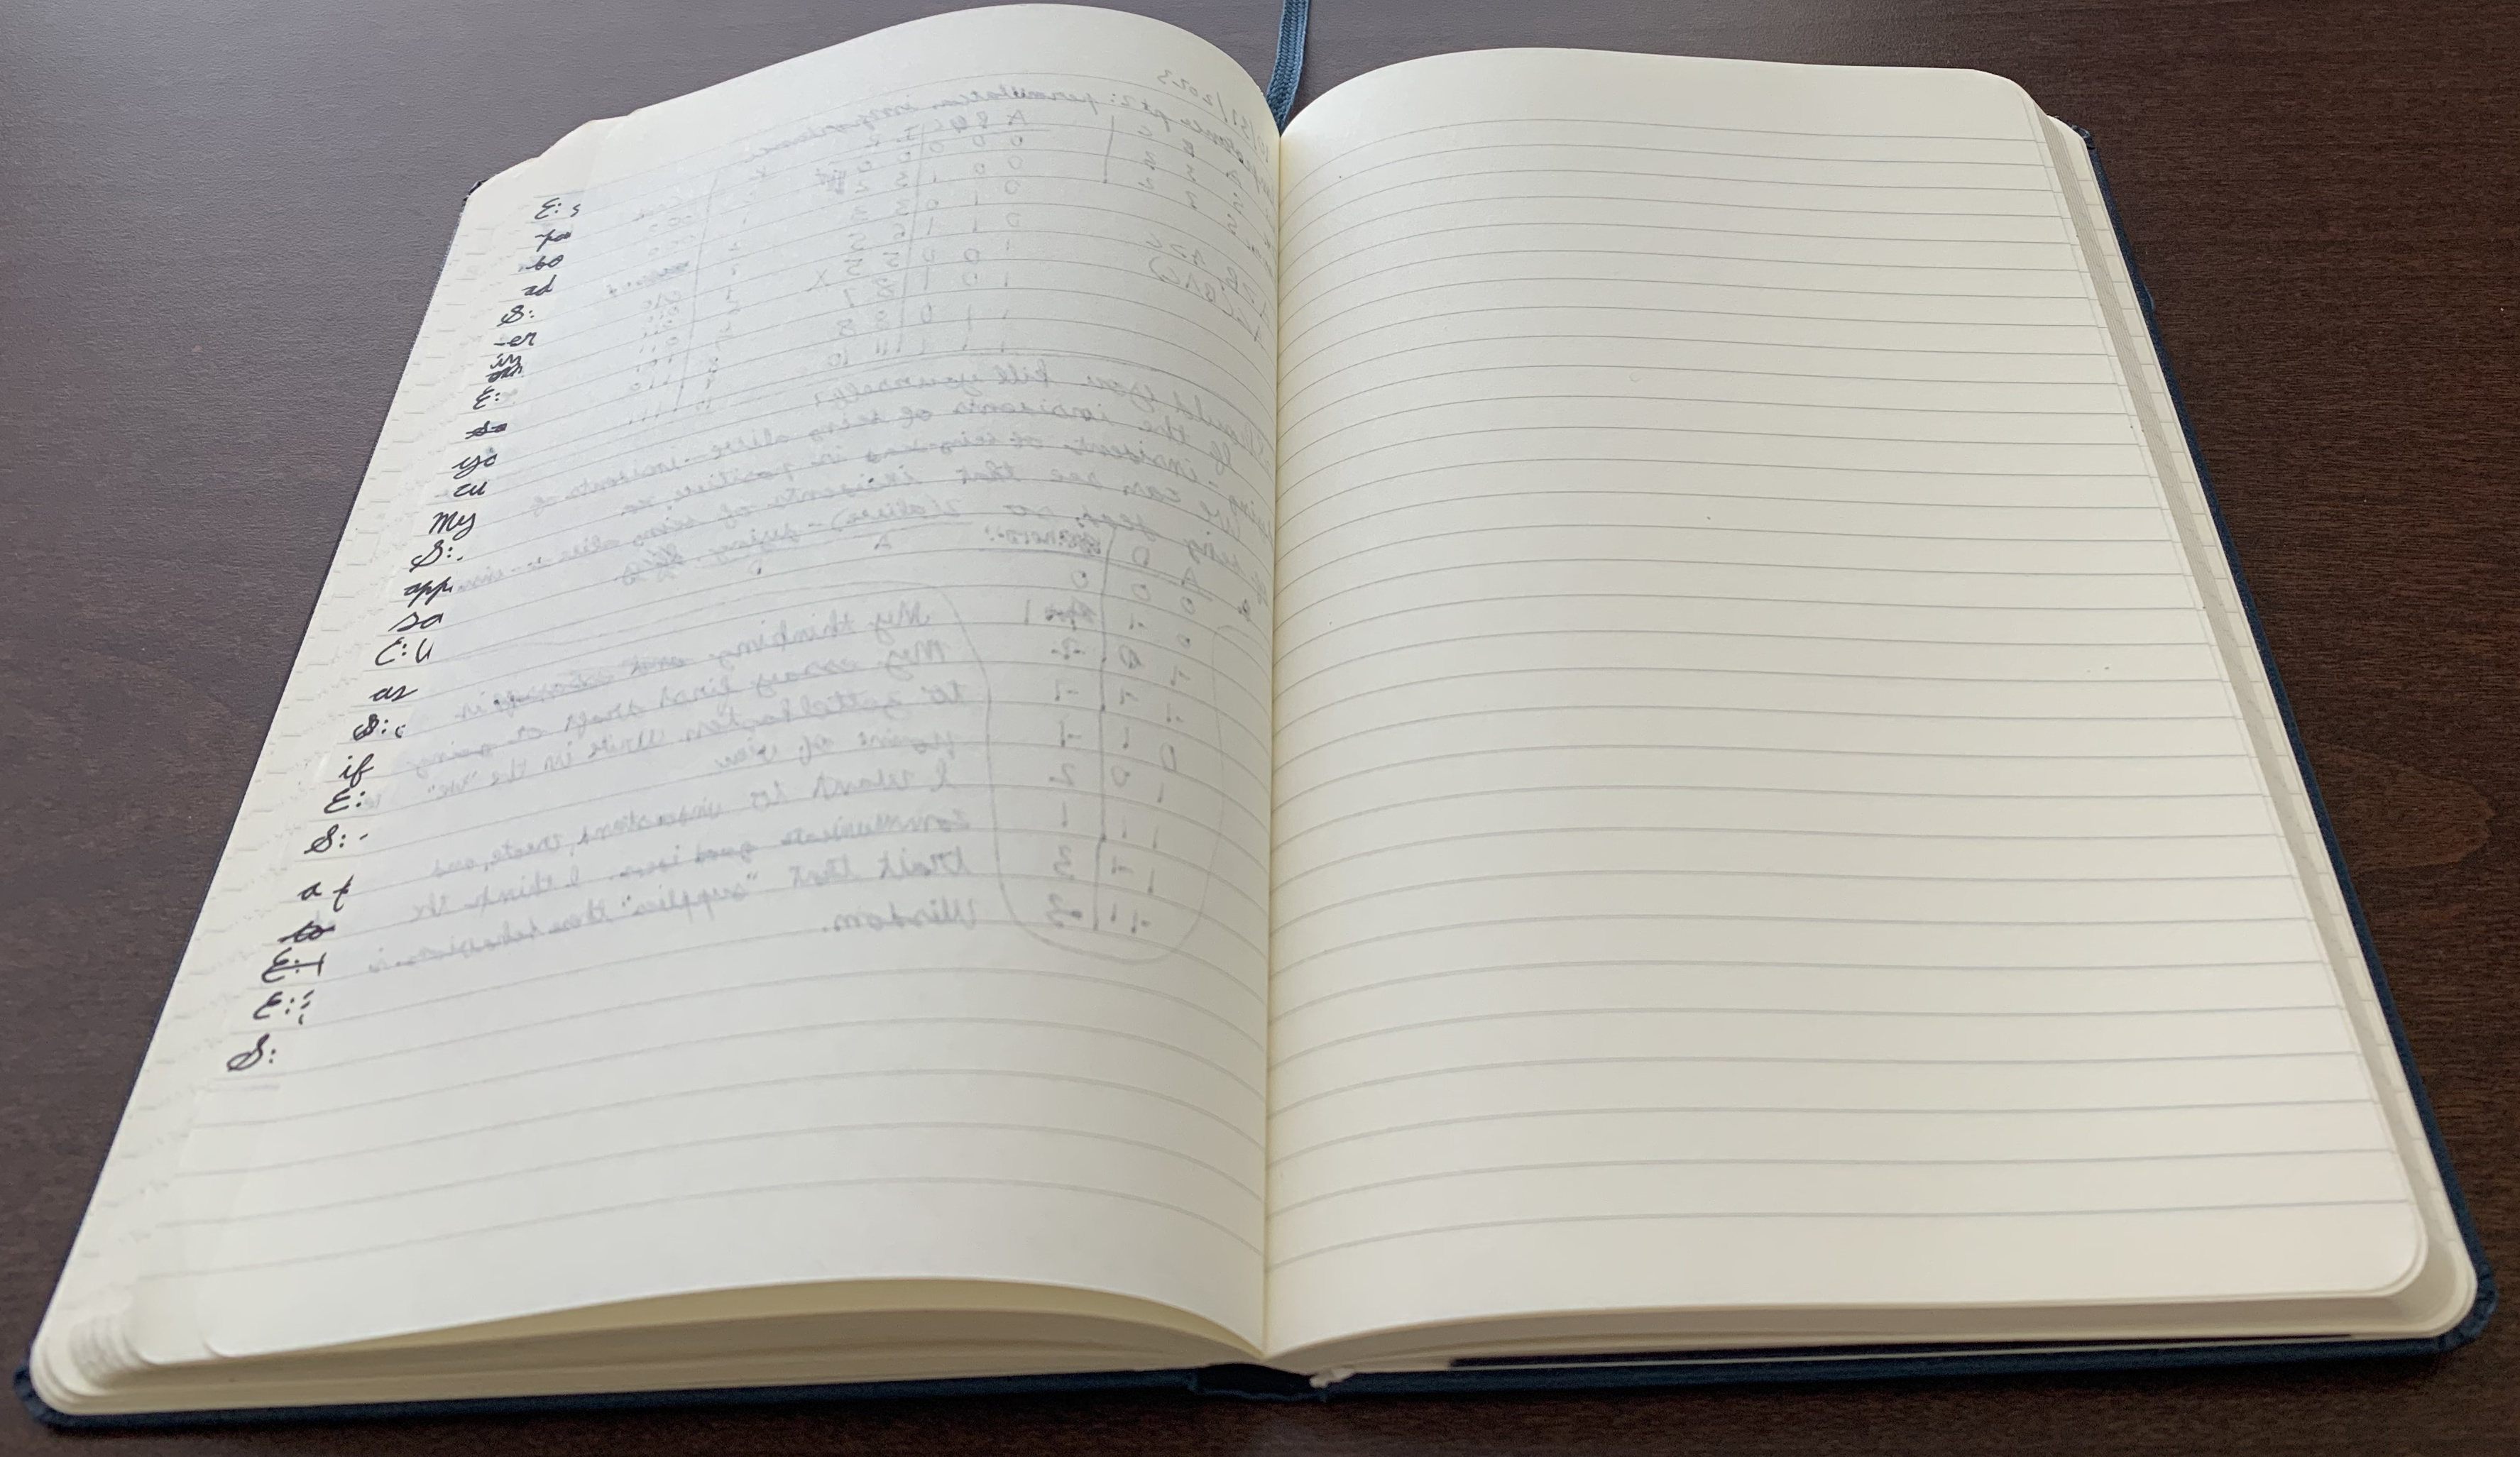 the moleskine notebook, open to a blank spread of lined paper. there is ghosting from the previous page, unintelligible writing in black ink